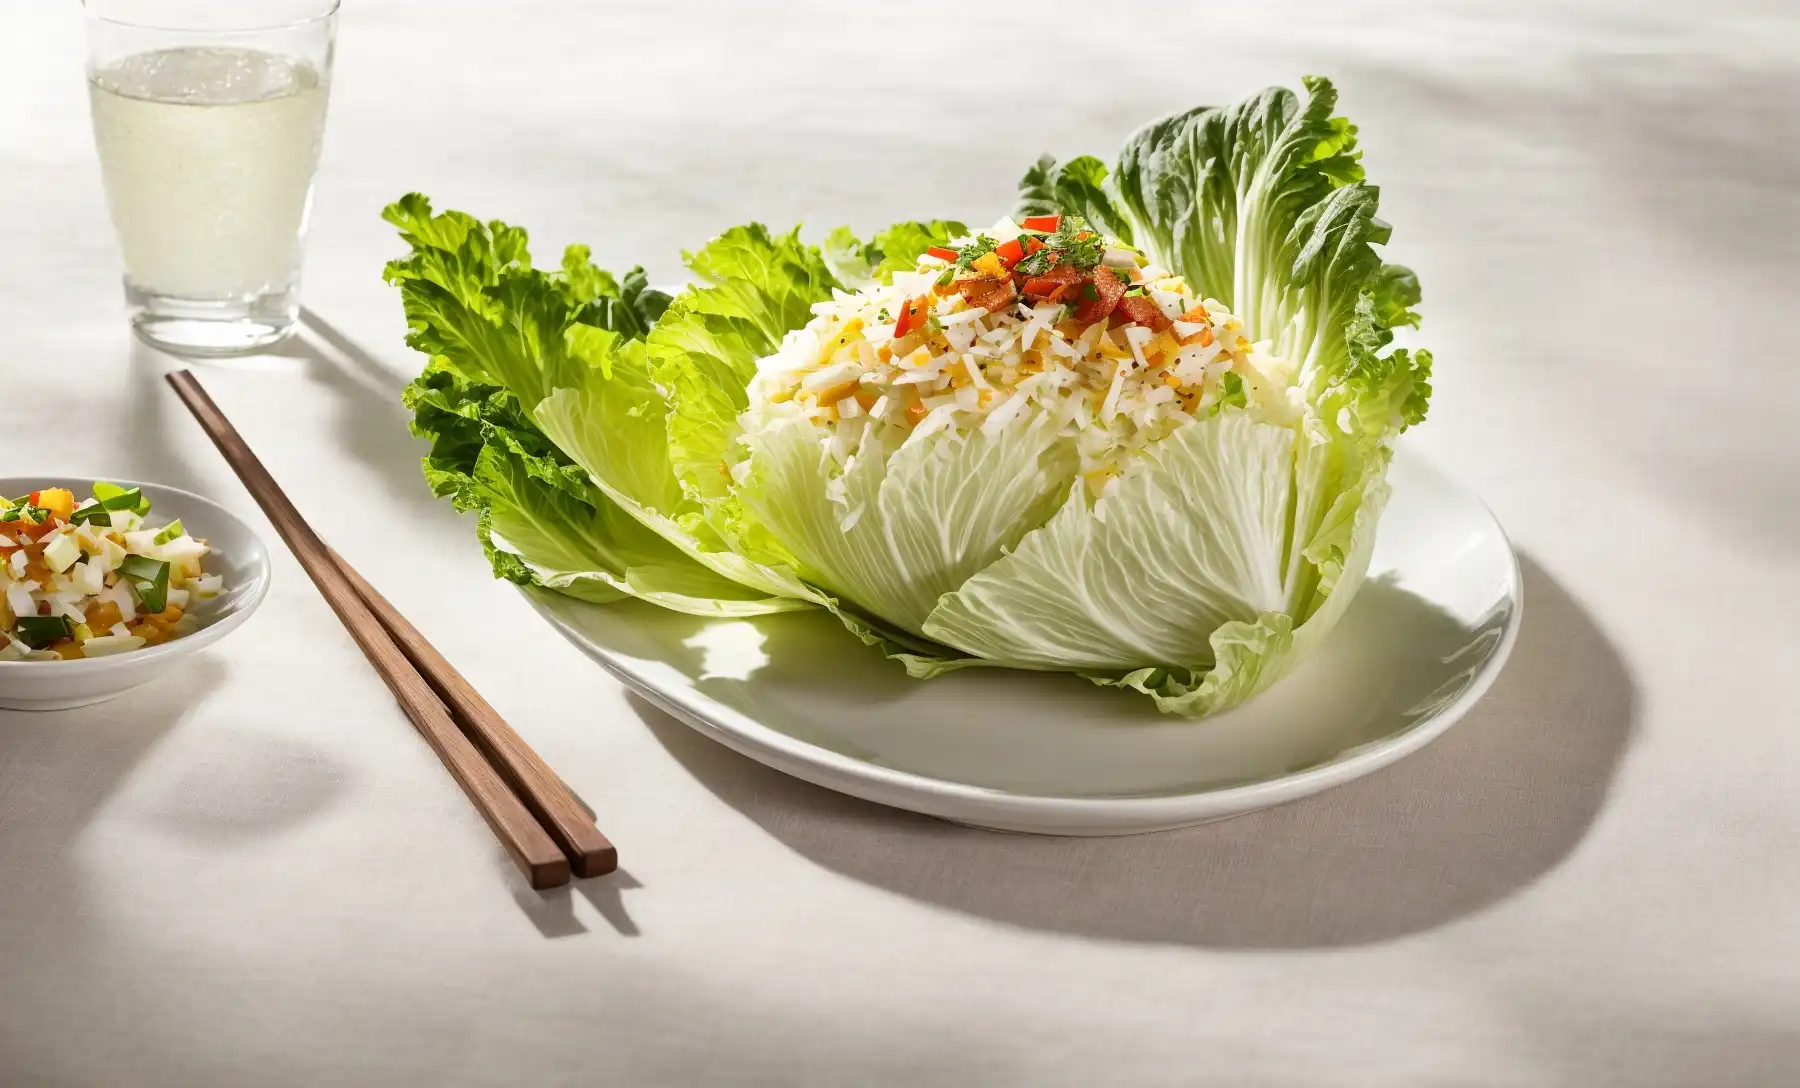 How to Eat Napa Cabbage: Delicious Ways